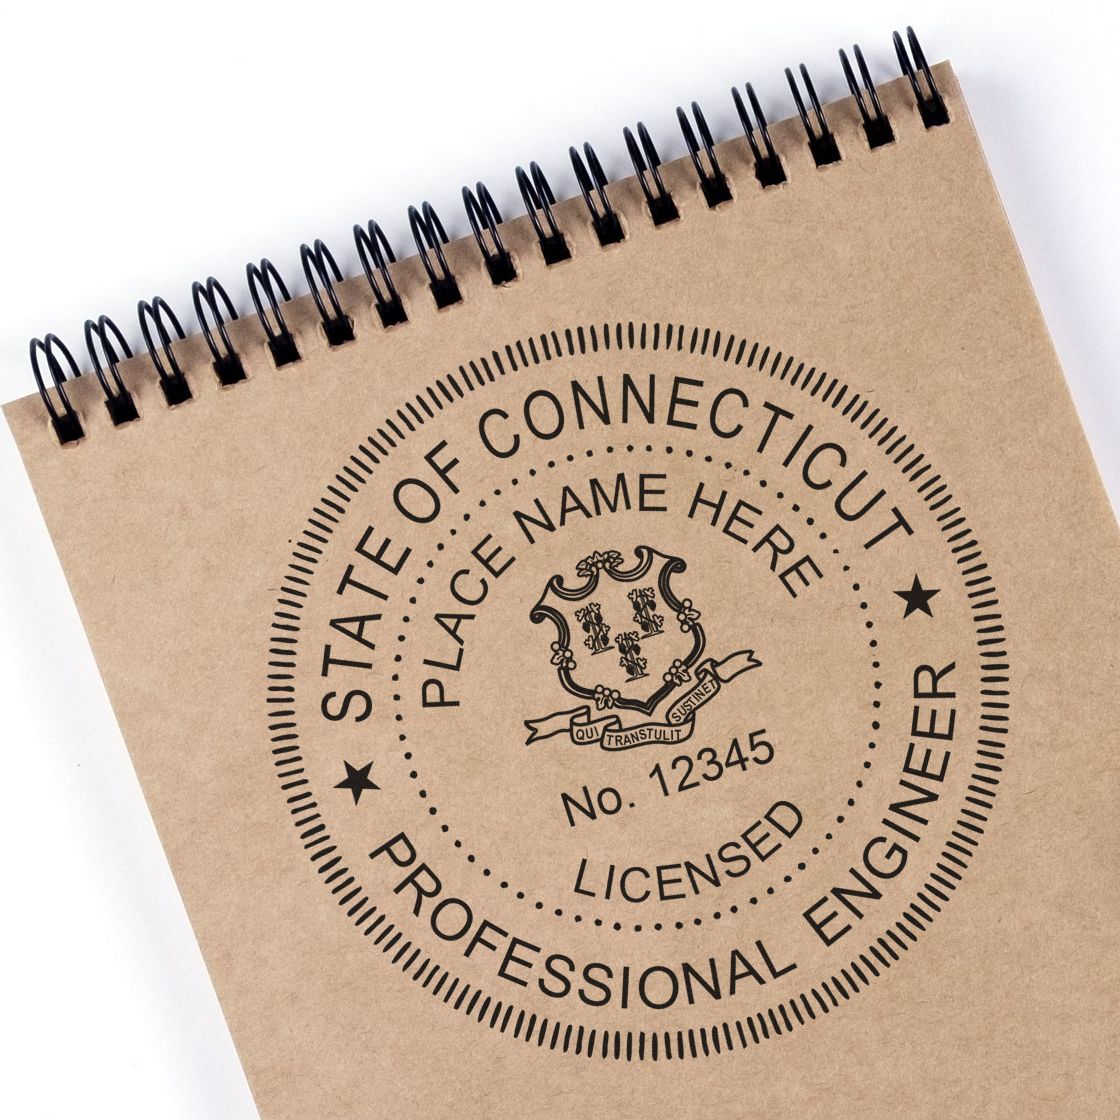 A stamped impression of the Self-Inking Connecticut PE Stamp in this stylish lifestyle photo, setting the tone for a unique and personalized product.